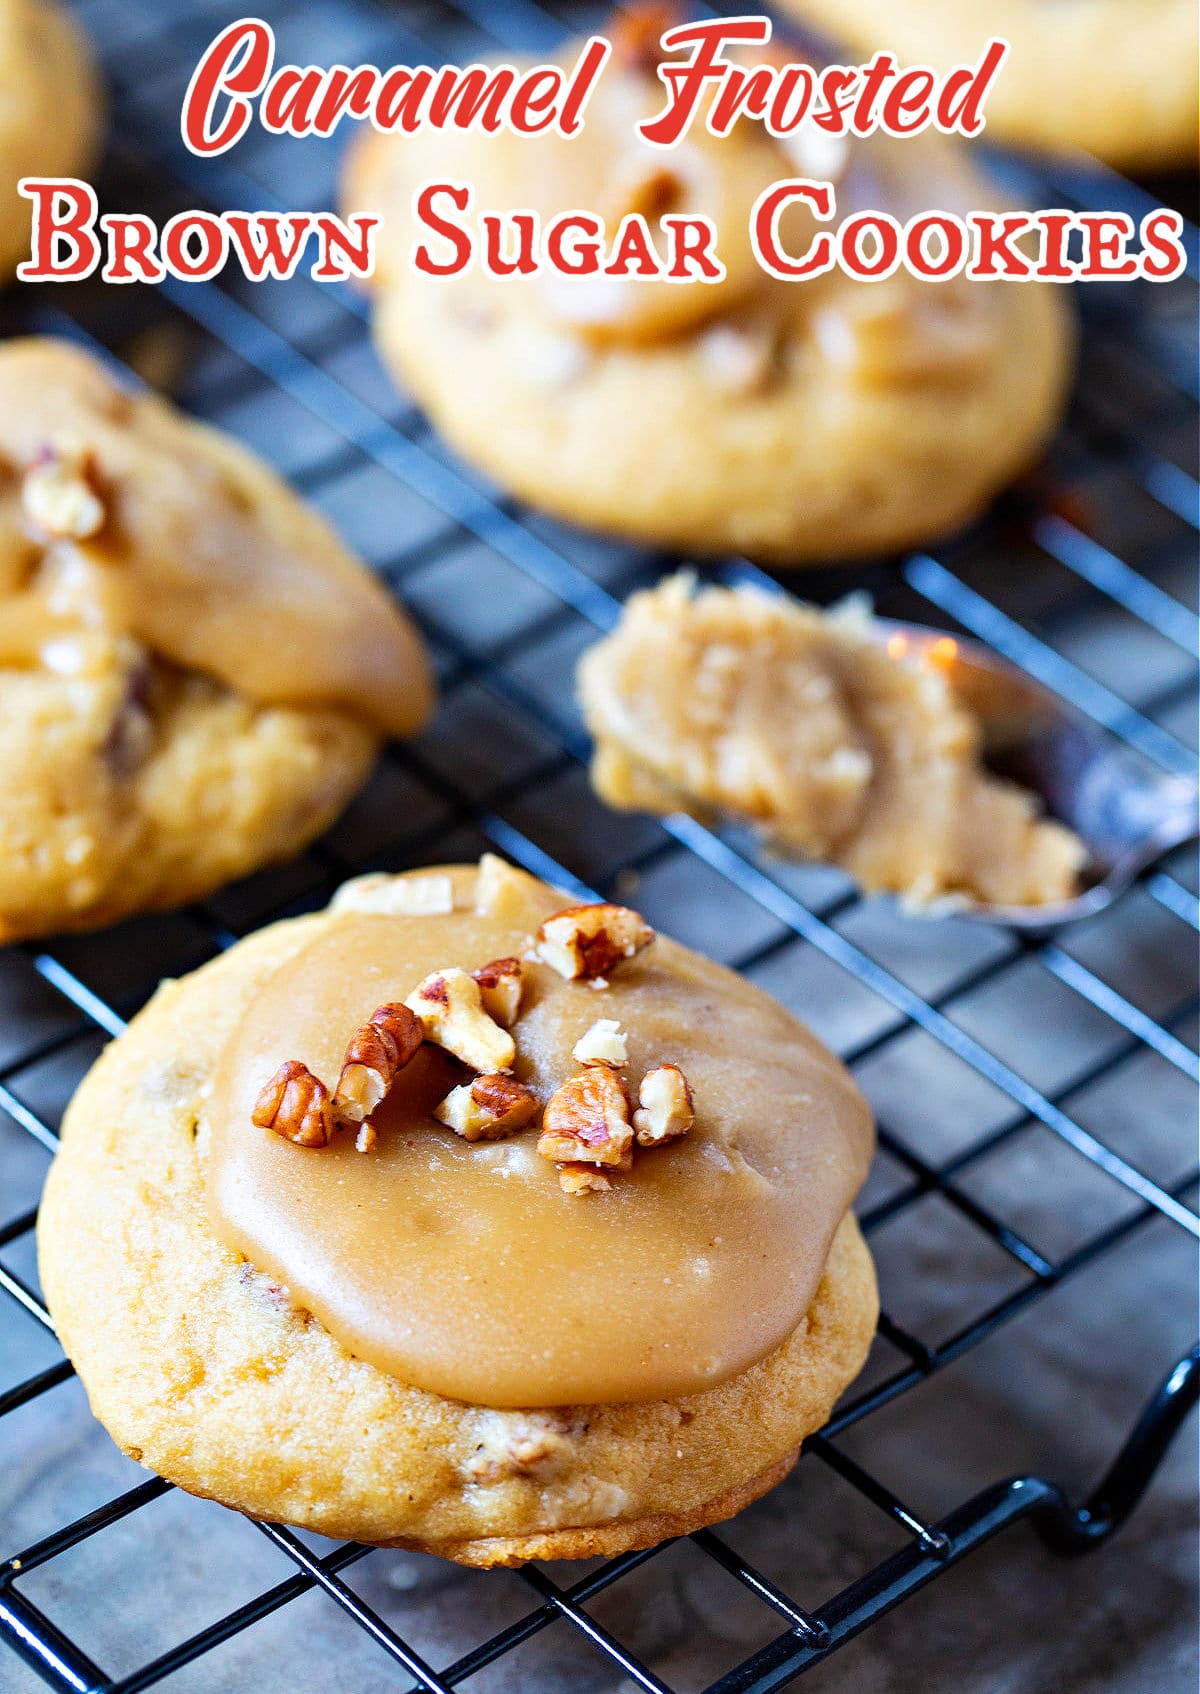 Caramel Frosted Brown Suagr Cookies on cooling rack.